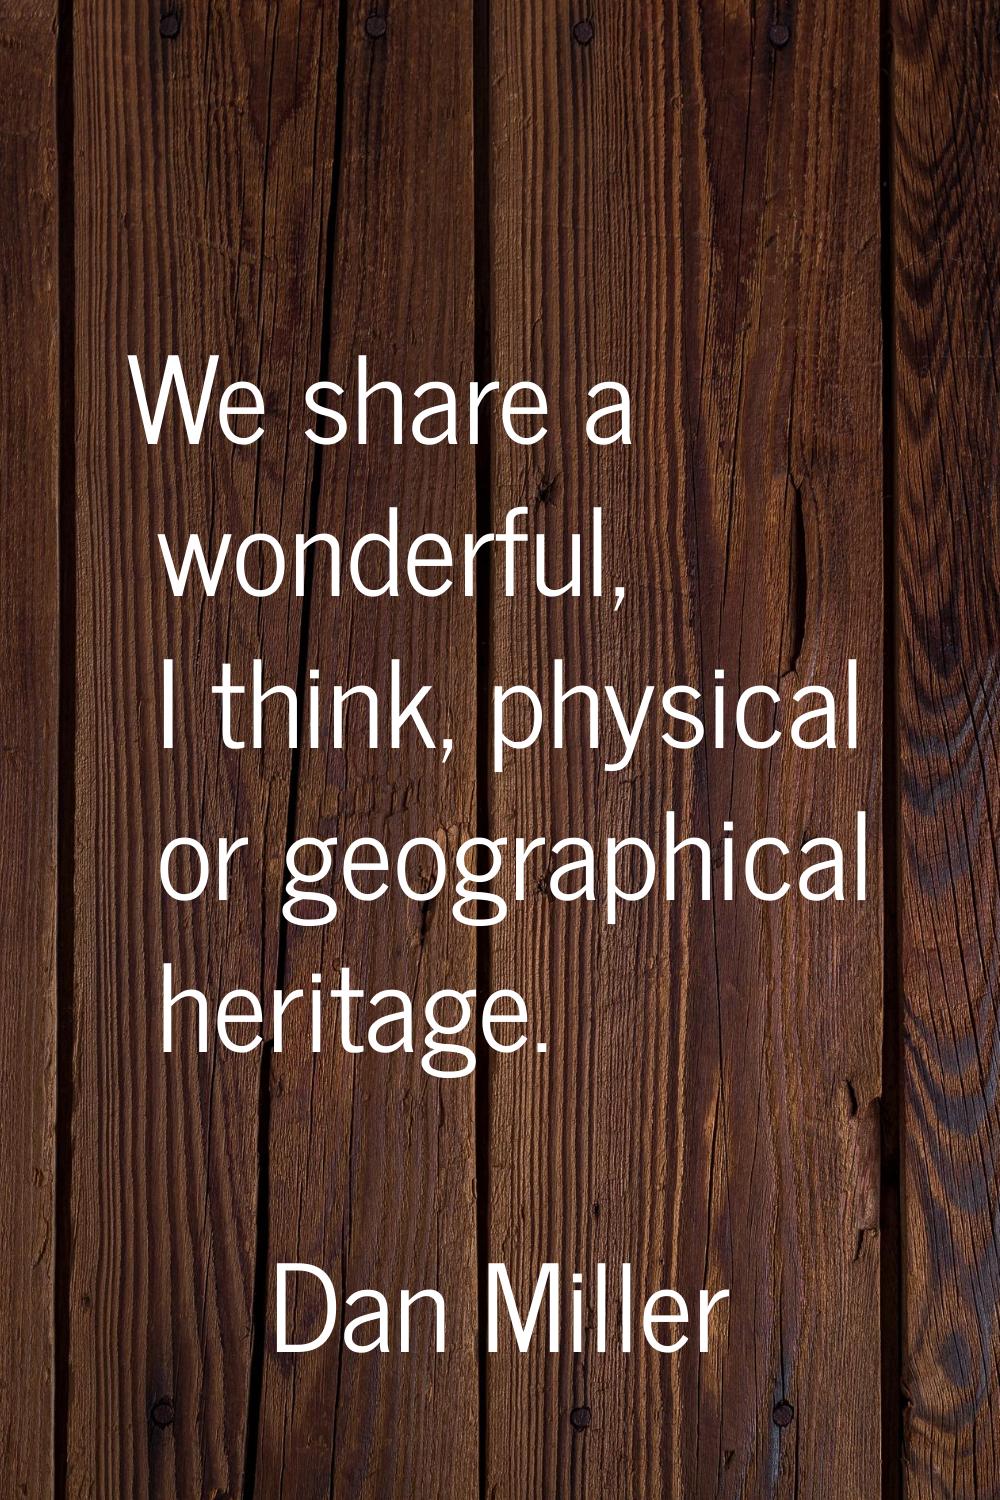 We share a wonderful, I think, physical or geographical heritage.